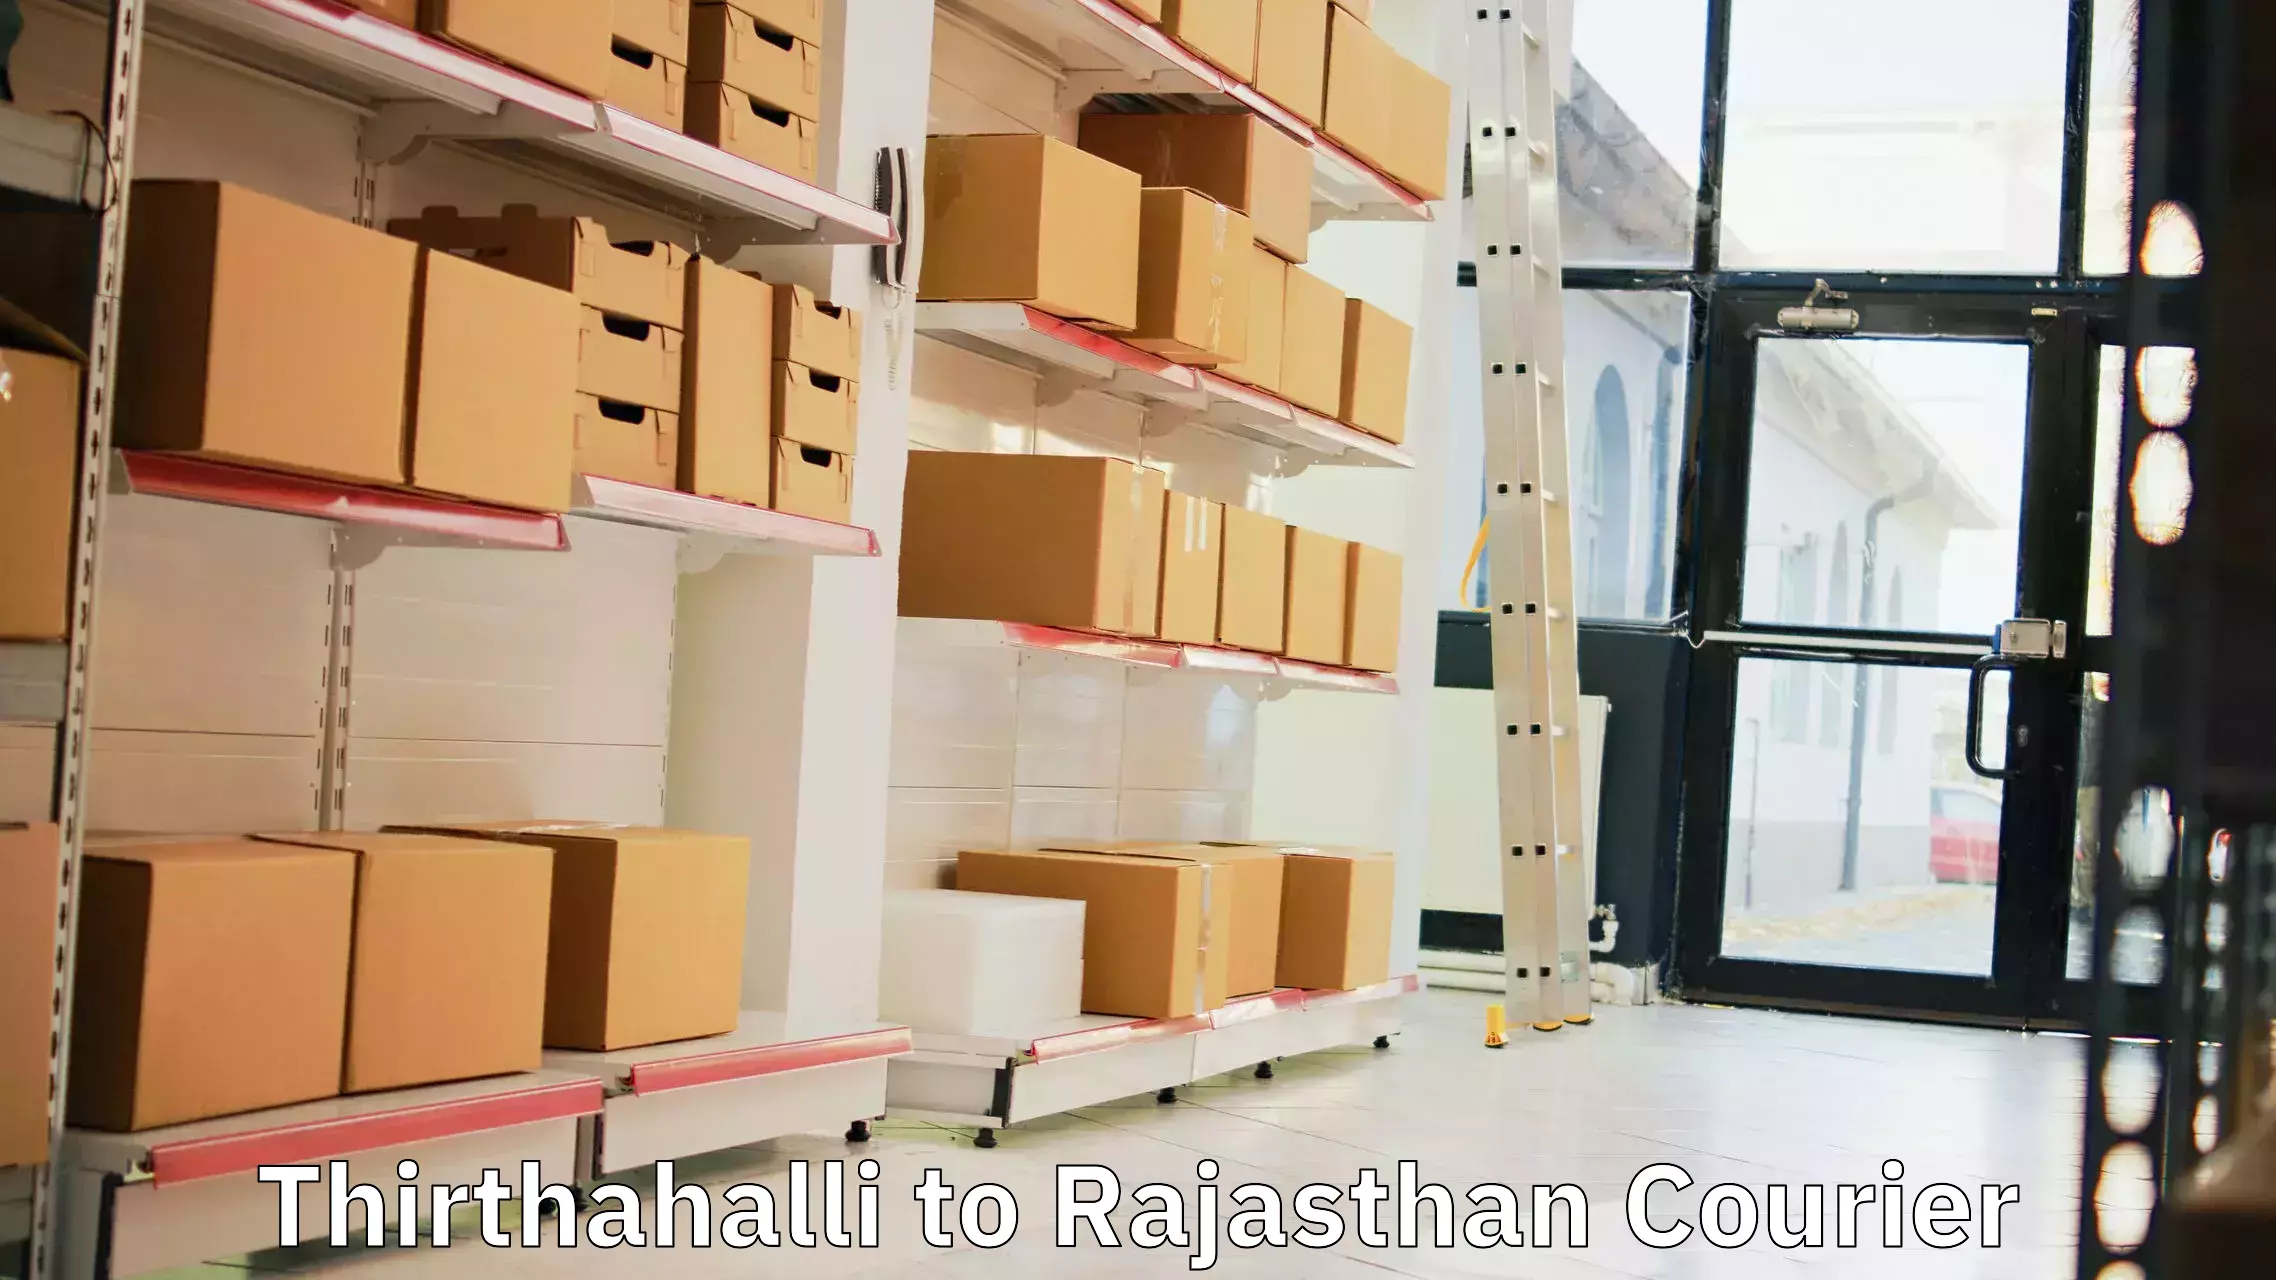 Courier service innovation Thirthahalli to Rajasthan